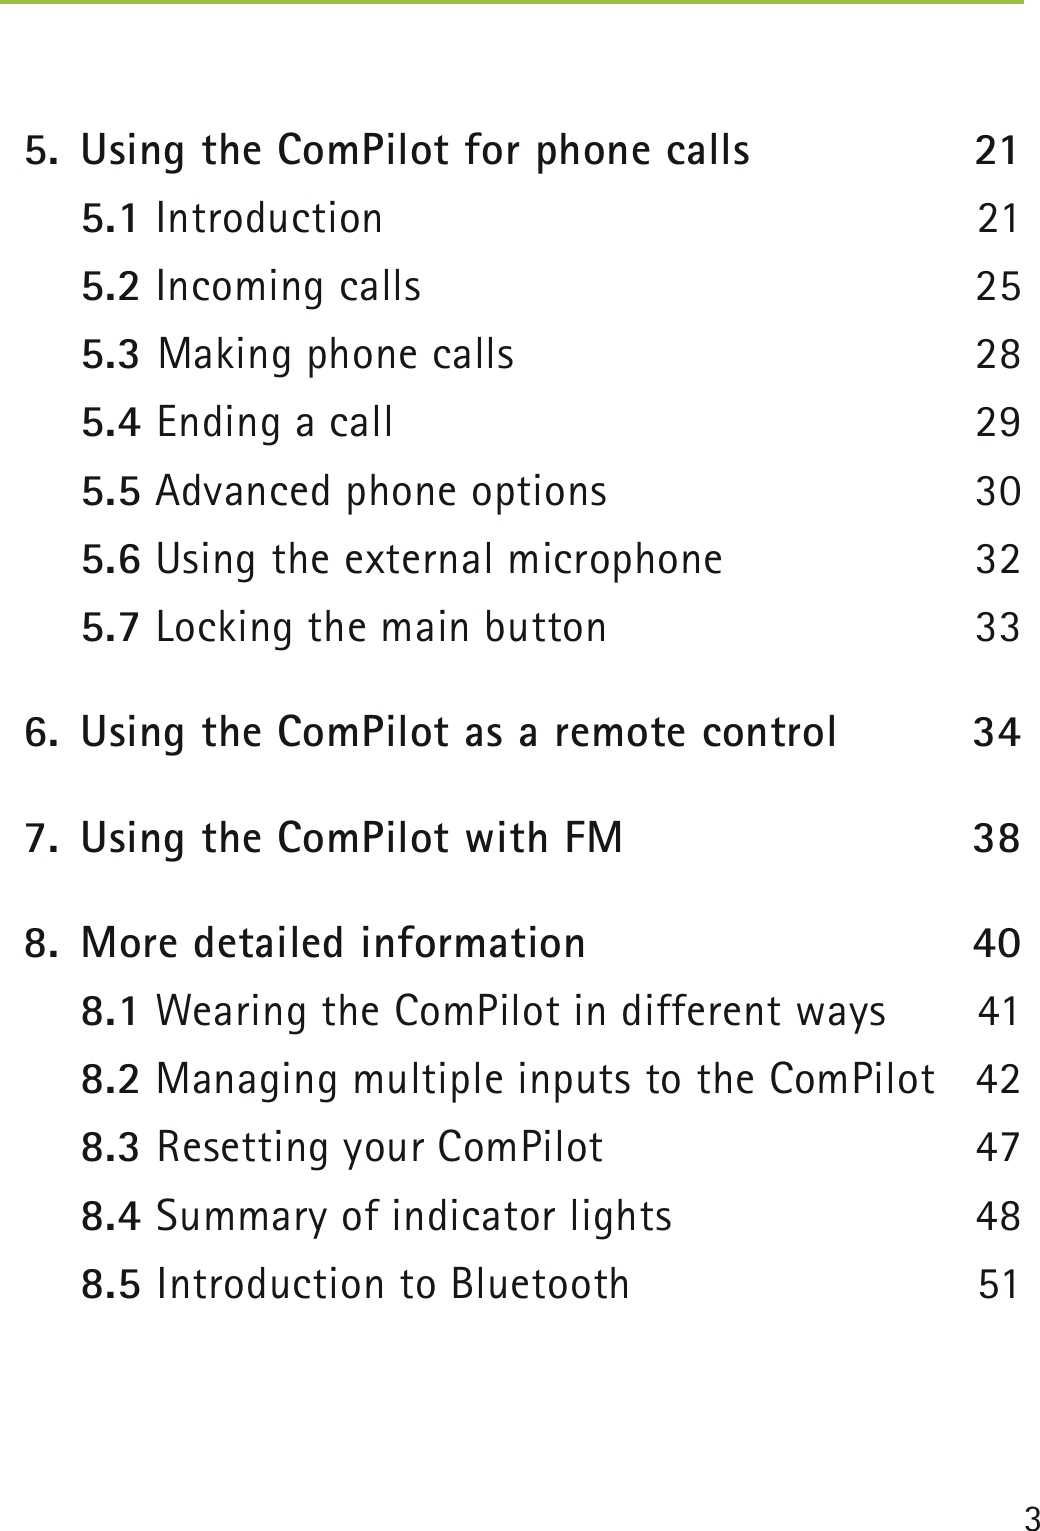 3  5.  Using the ComPilot for phone calls  21  5.1 Introduction  21  5.2 Incoming calls  25  5.3 Making phone calls  28  5.4 Ending a call   29  5.5 Advanced phone options  30   5.6 Using the external microphone  32  5.7 Locking the main button   33  6.  Using the ComPilot as a remote control  34  7.  Using the ComPilot with FM  38  8.  More detailed information  40  8.1 Wearing the ComPilot in different ways  41  8.2 Managing multiple inputs to the ComPilot  42  8.3 Resetting your ComPilot  47  8.4 Summary of indicator lights   48  8.5 Introduction to Bluetooth   51